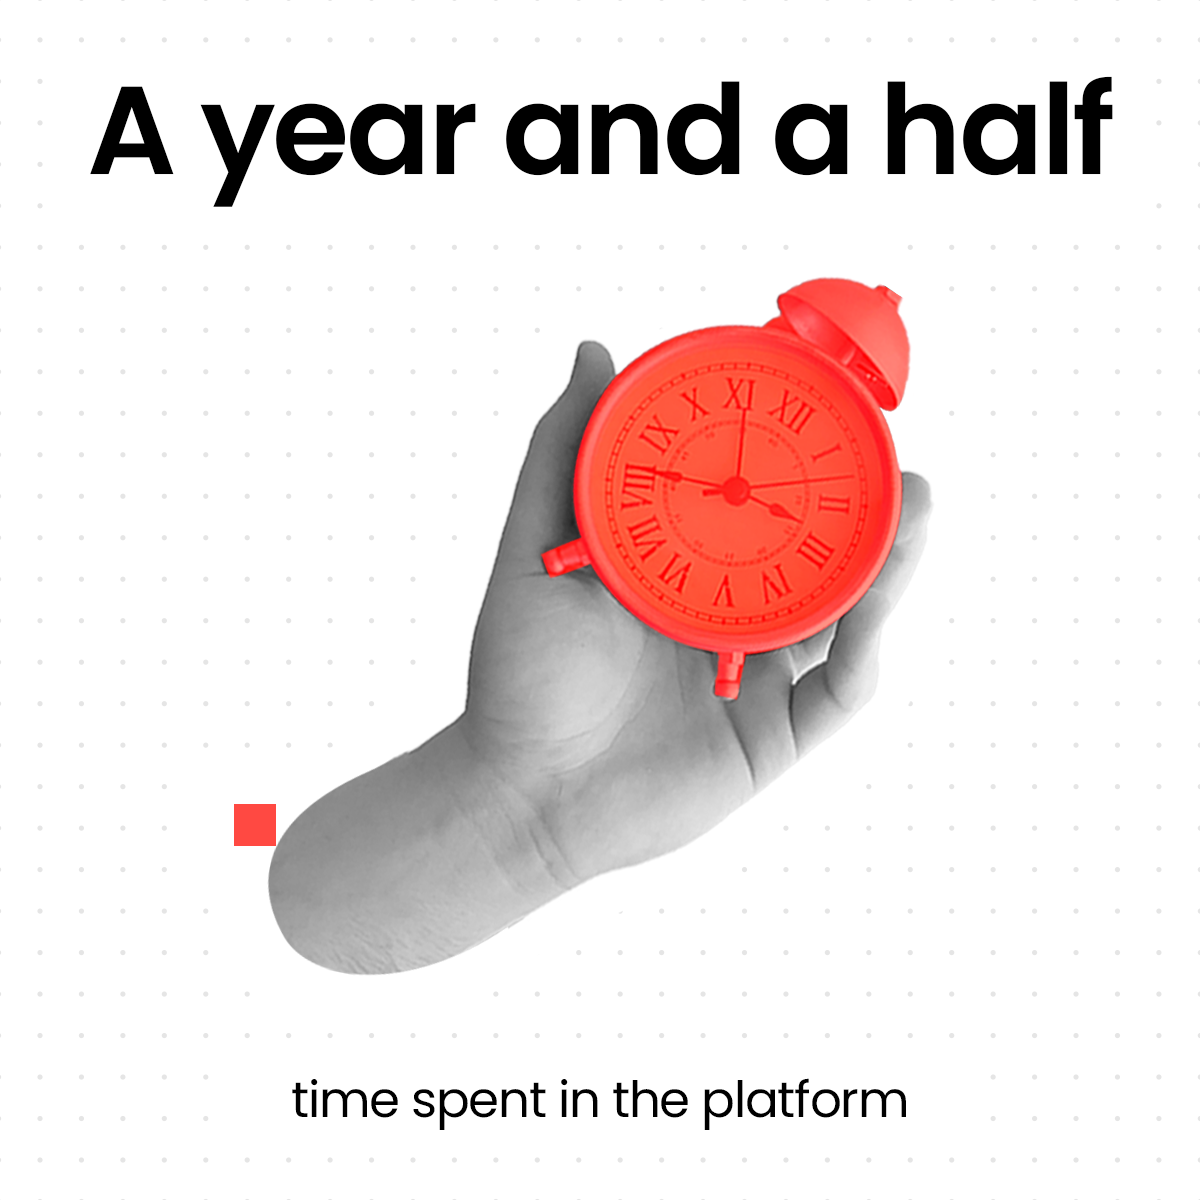 In 2022 our users accumulated a year and a half worth of time spent on Sensat